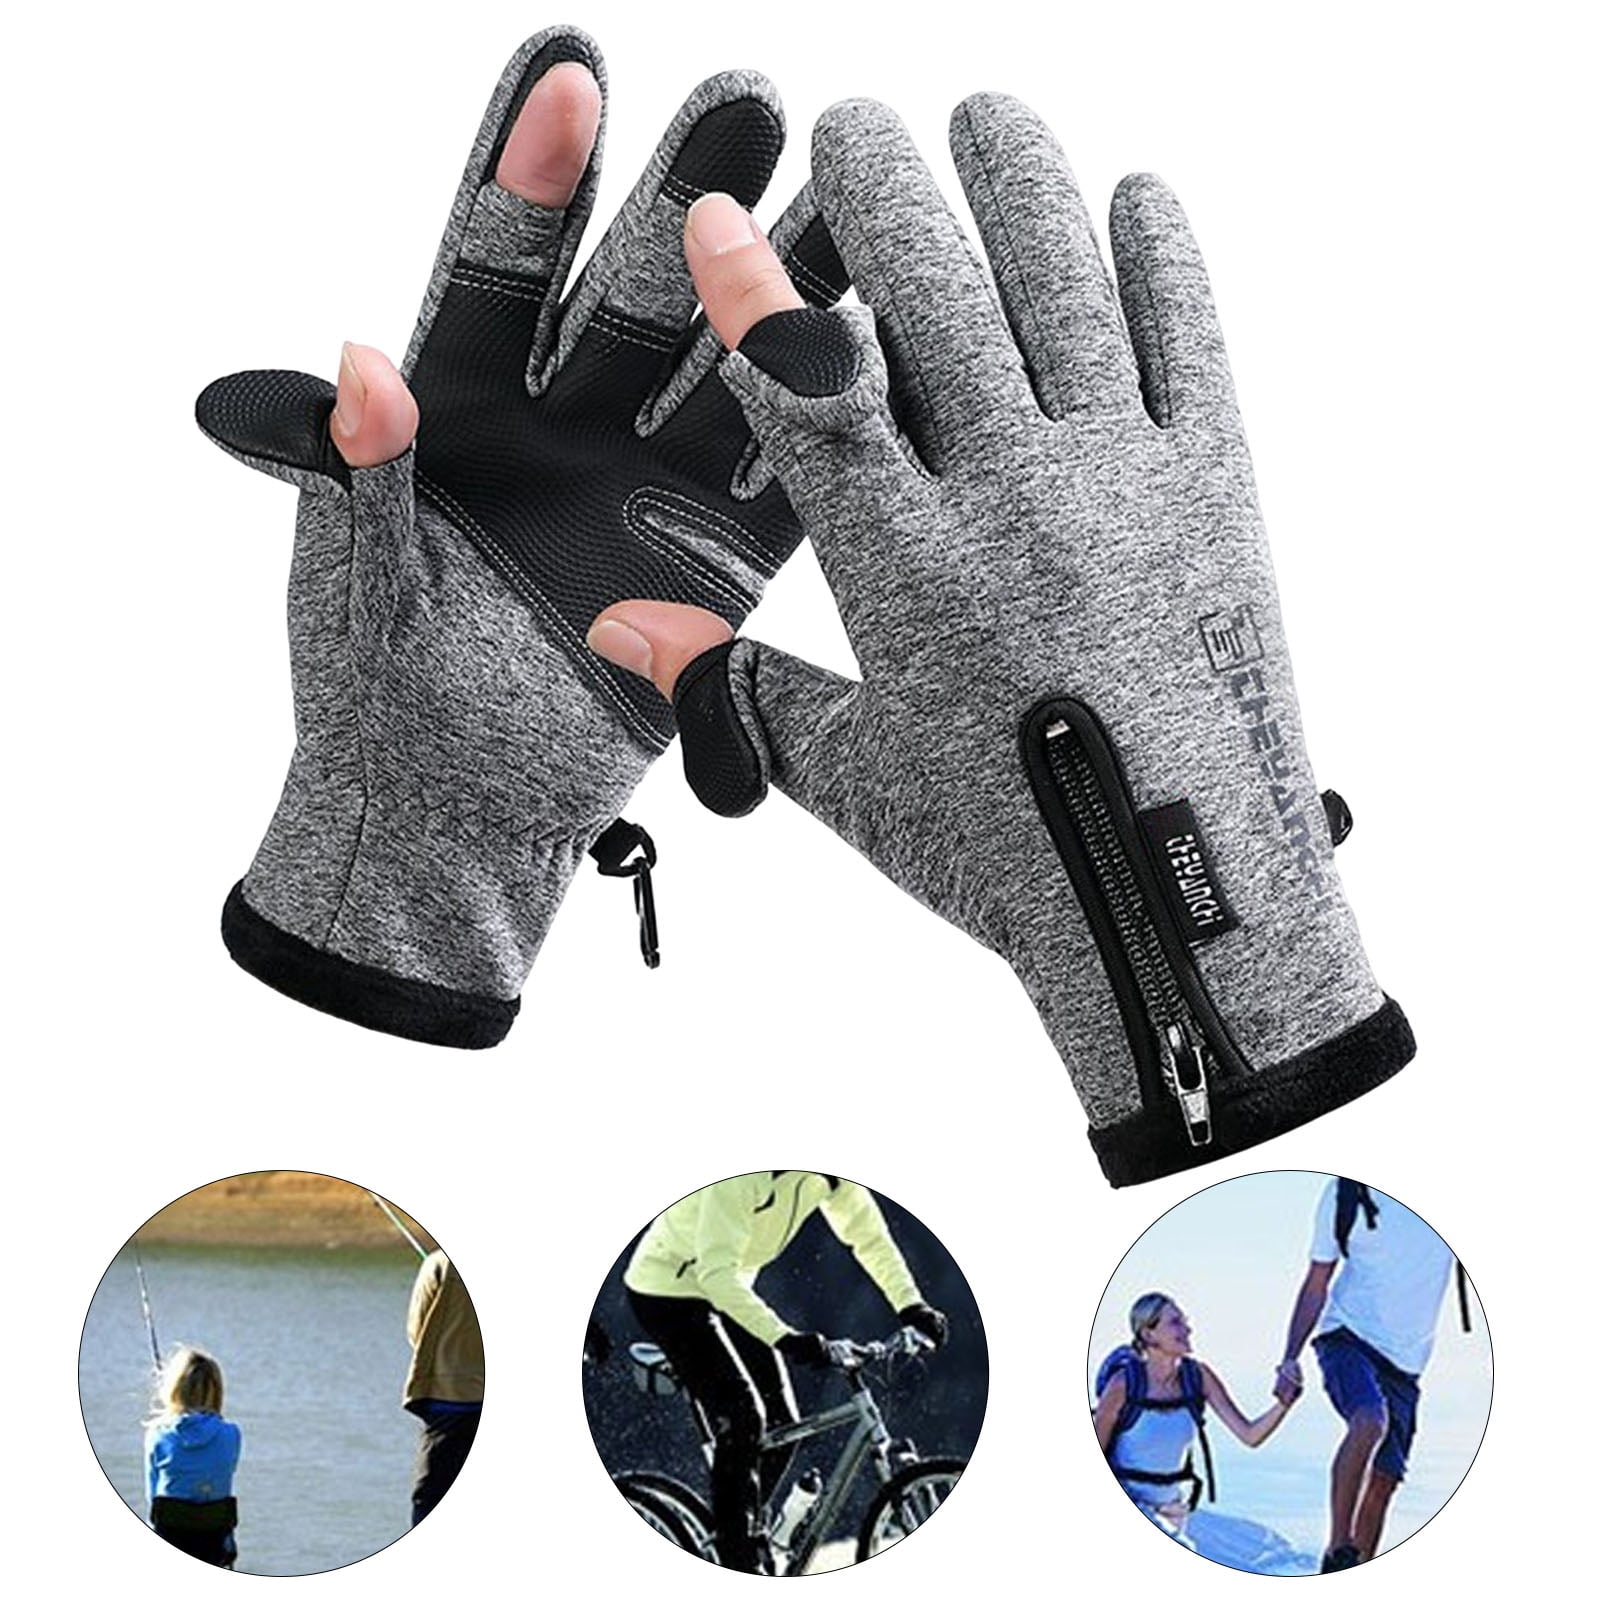 USB Heating Gloves 1 PairTouch Screen Zipper Cuffs Letter Print Fingertip  Opening Winter Adjustable Temperature Fishing Gloves,Grey 